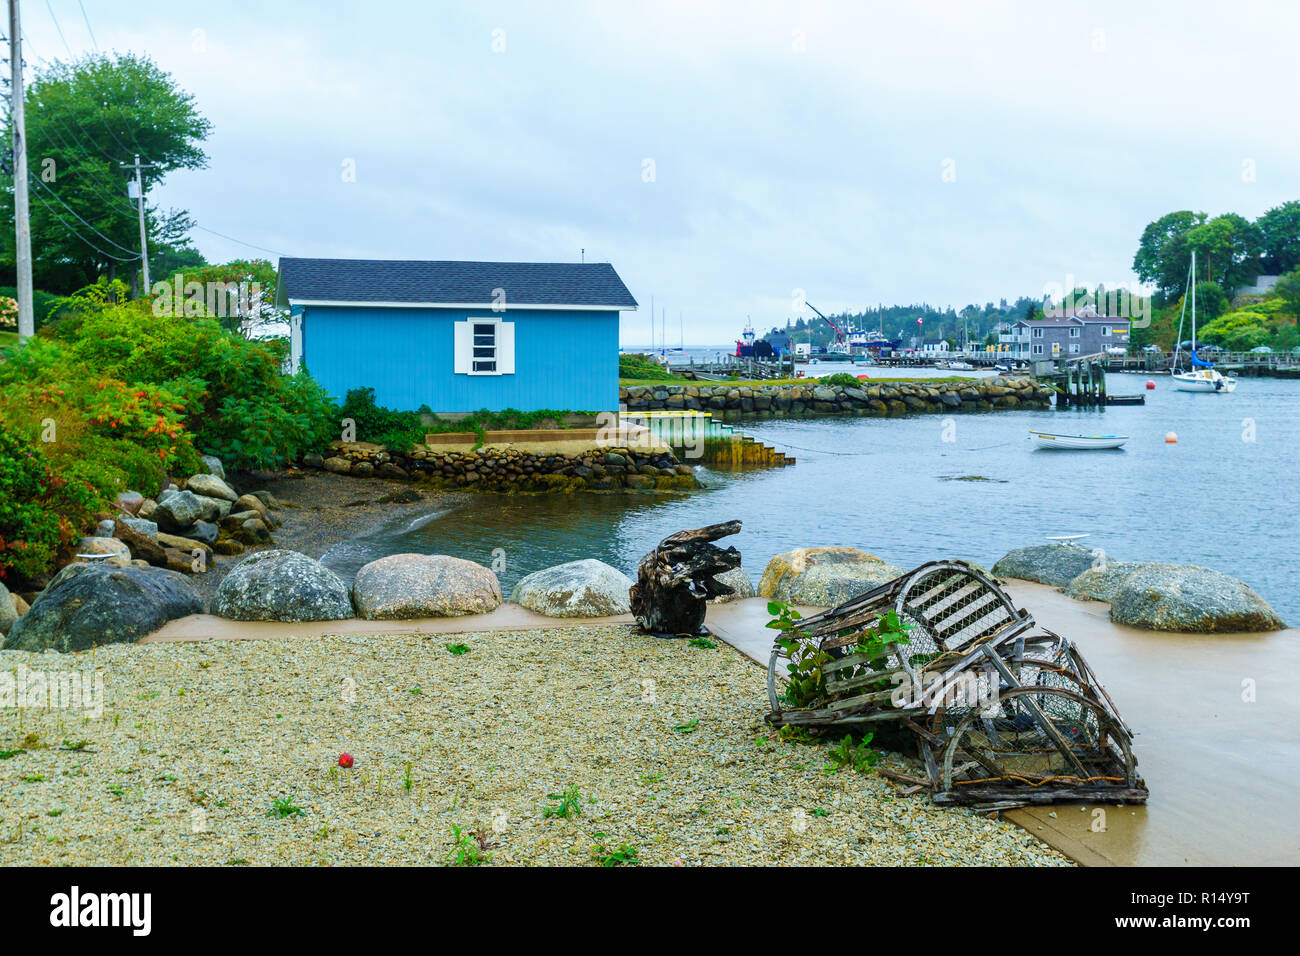 View of bay, boats and houses in Chester, Nova Scotia, Canada Stock Photo